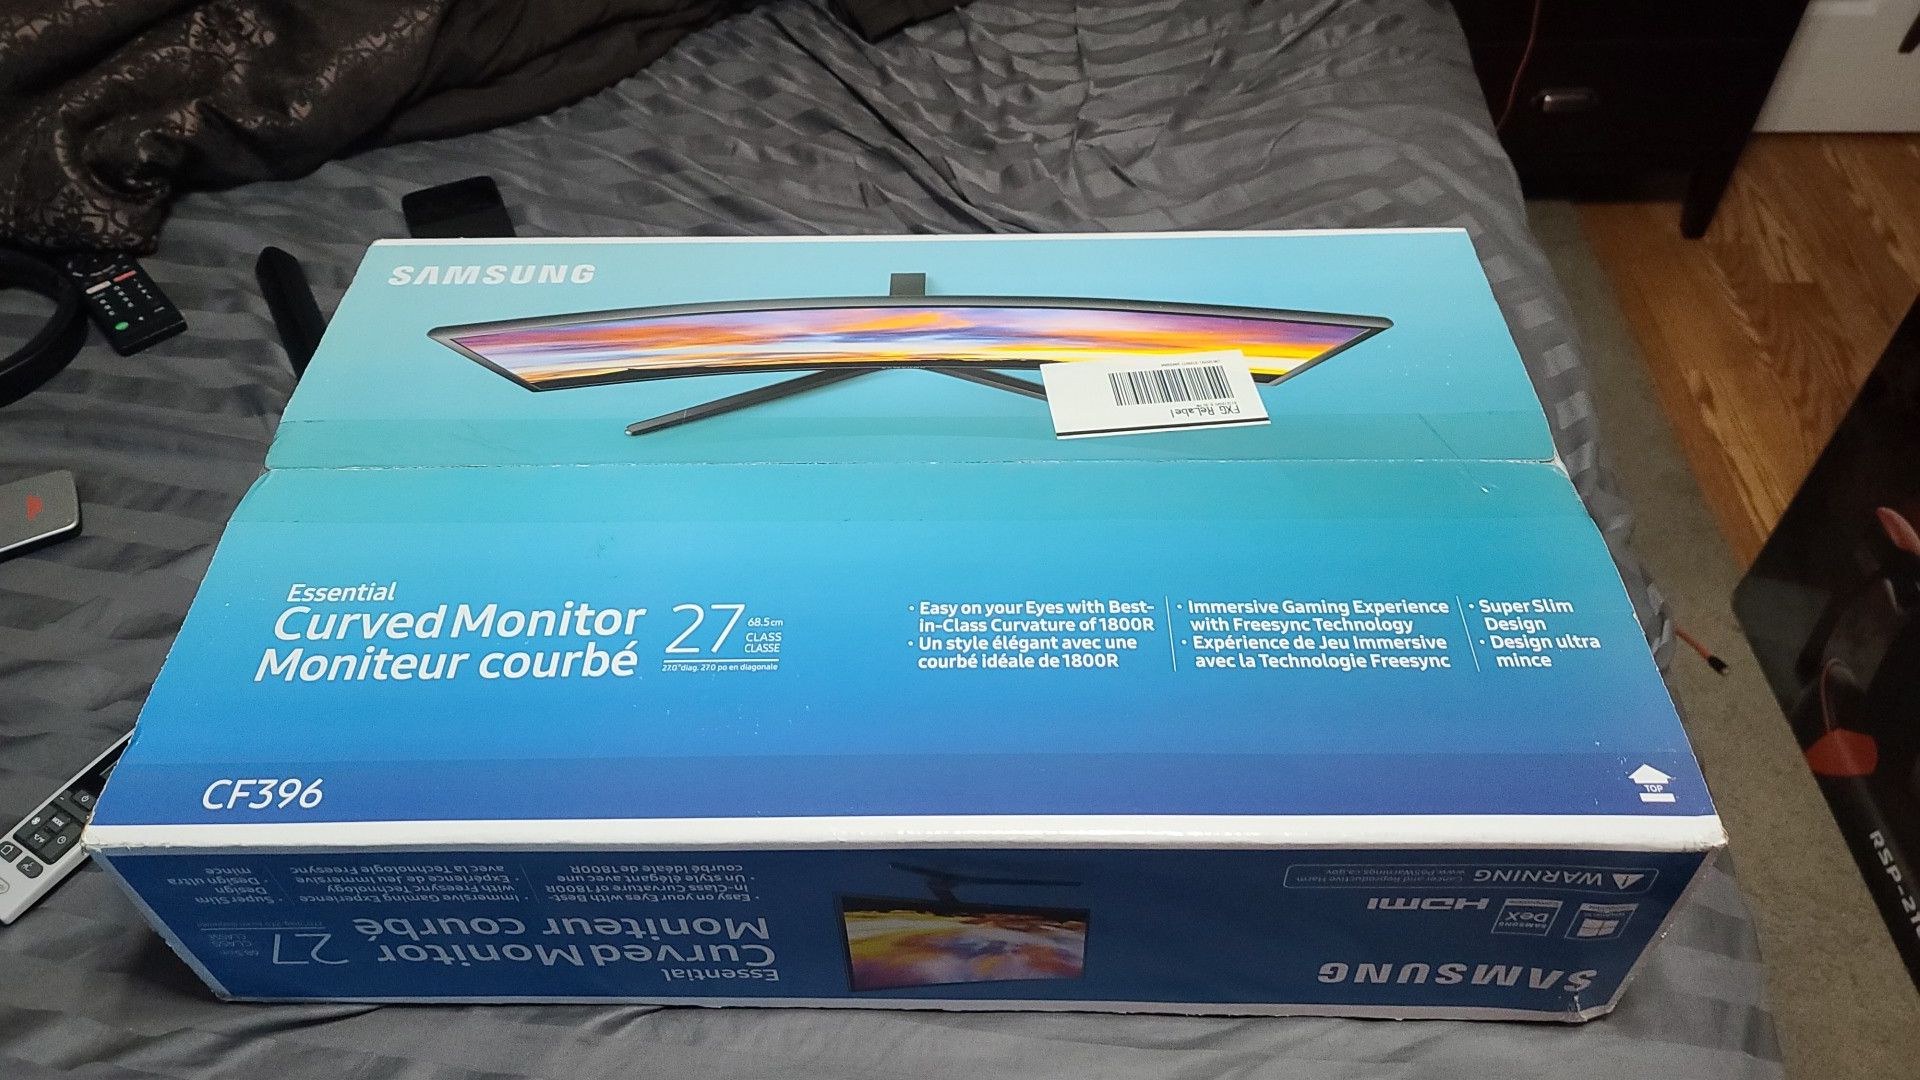 Samsung 27inch curved monitor in box